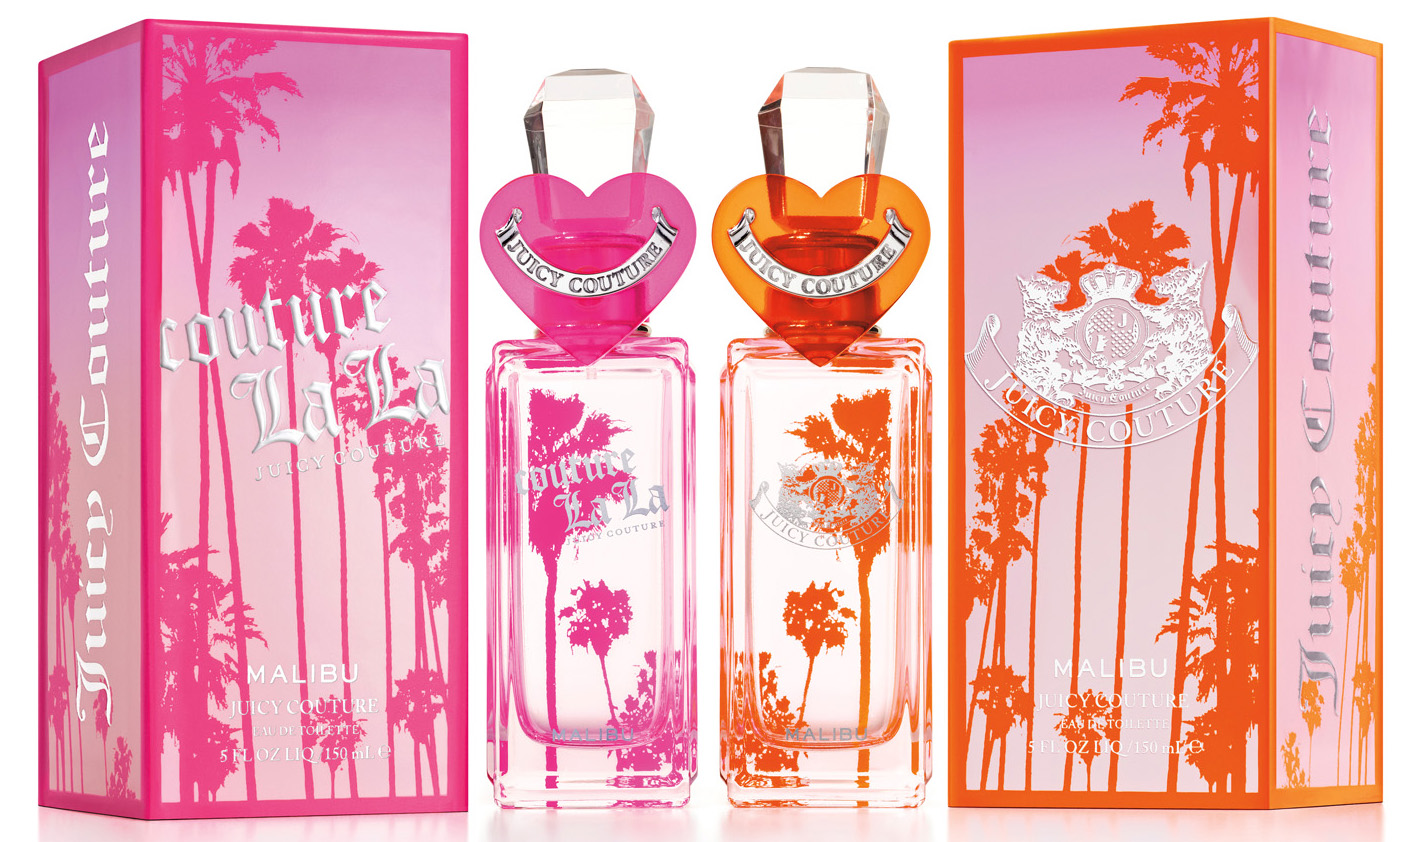 juicy-couture-couture-lala-Malibu Collection